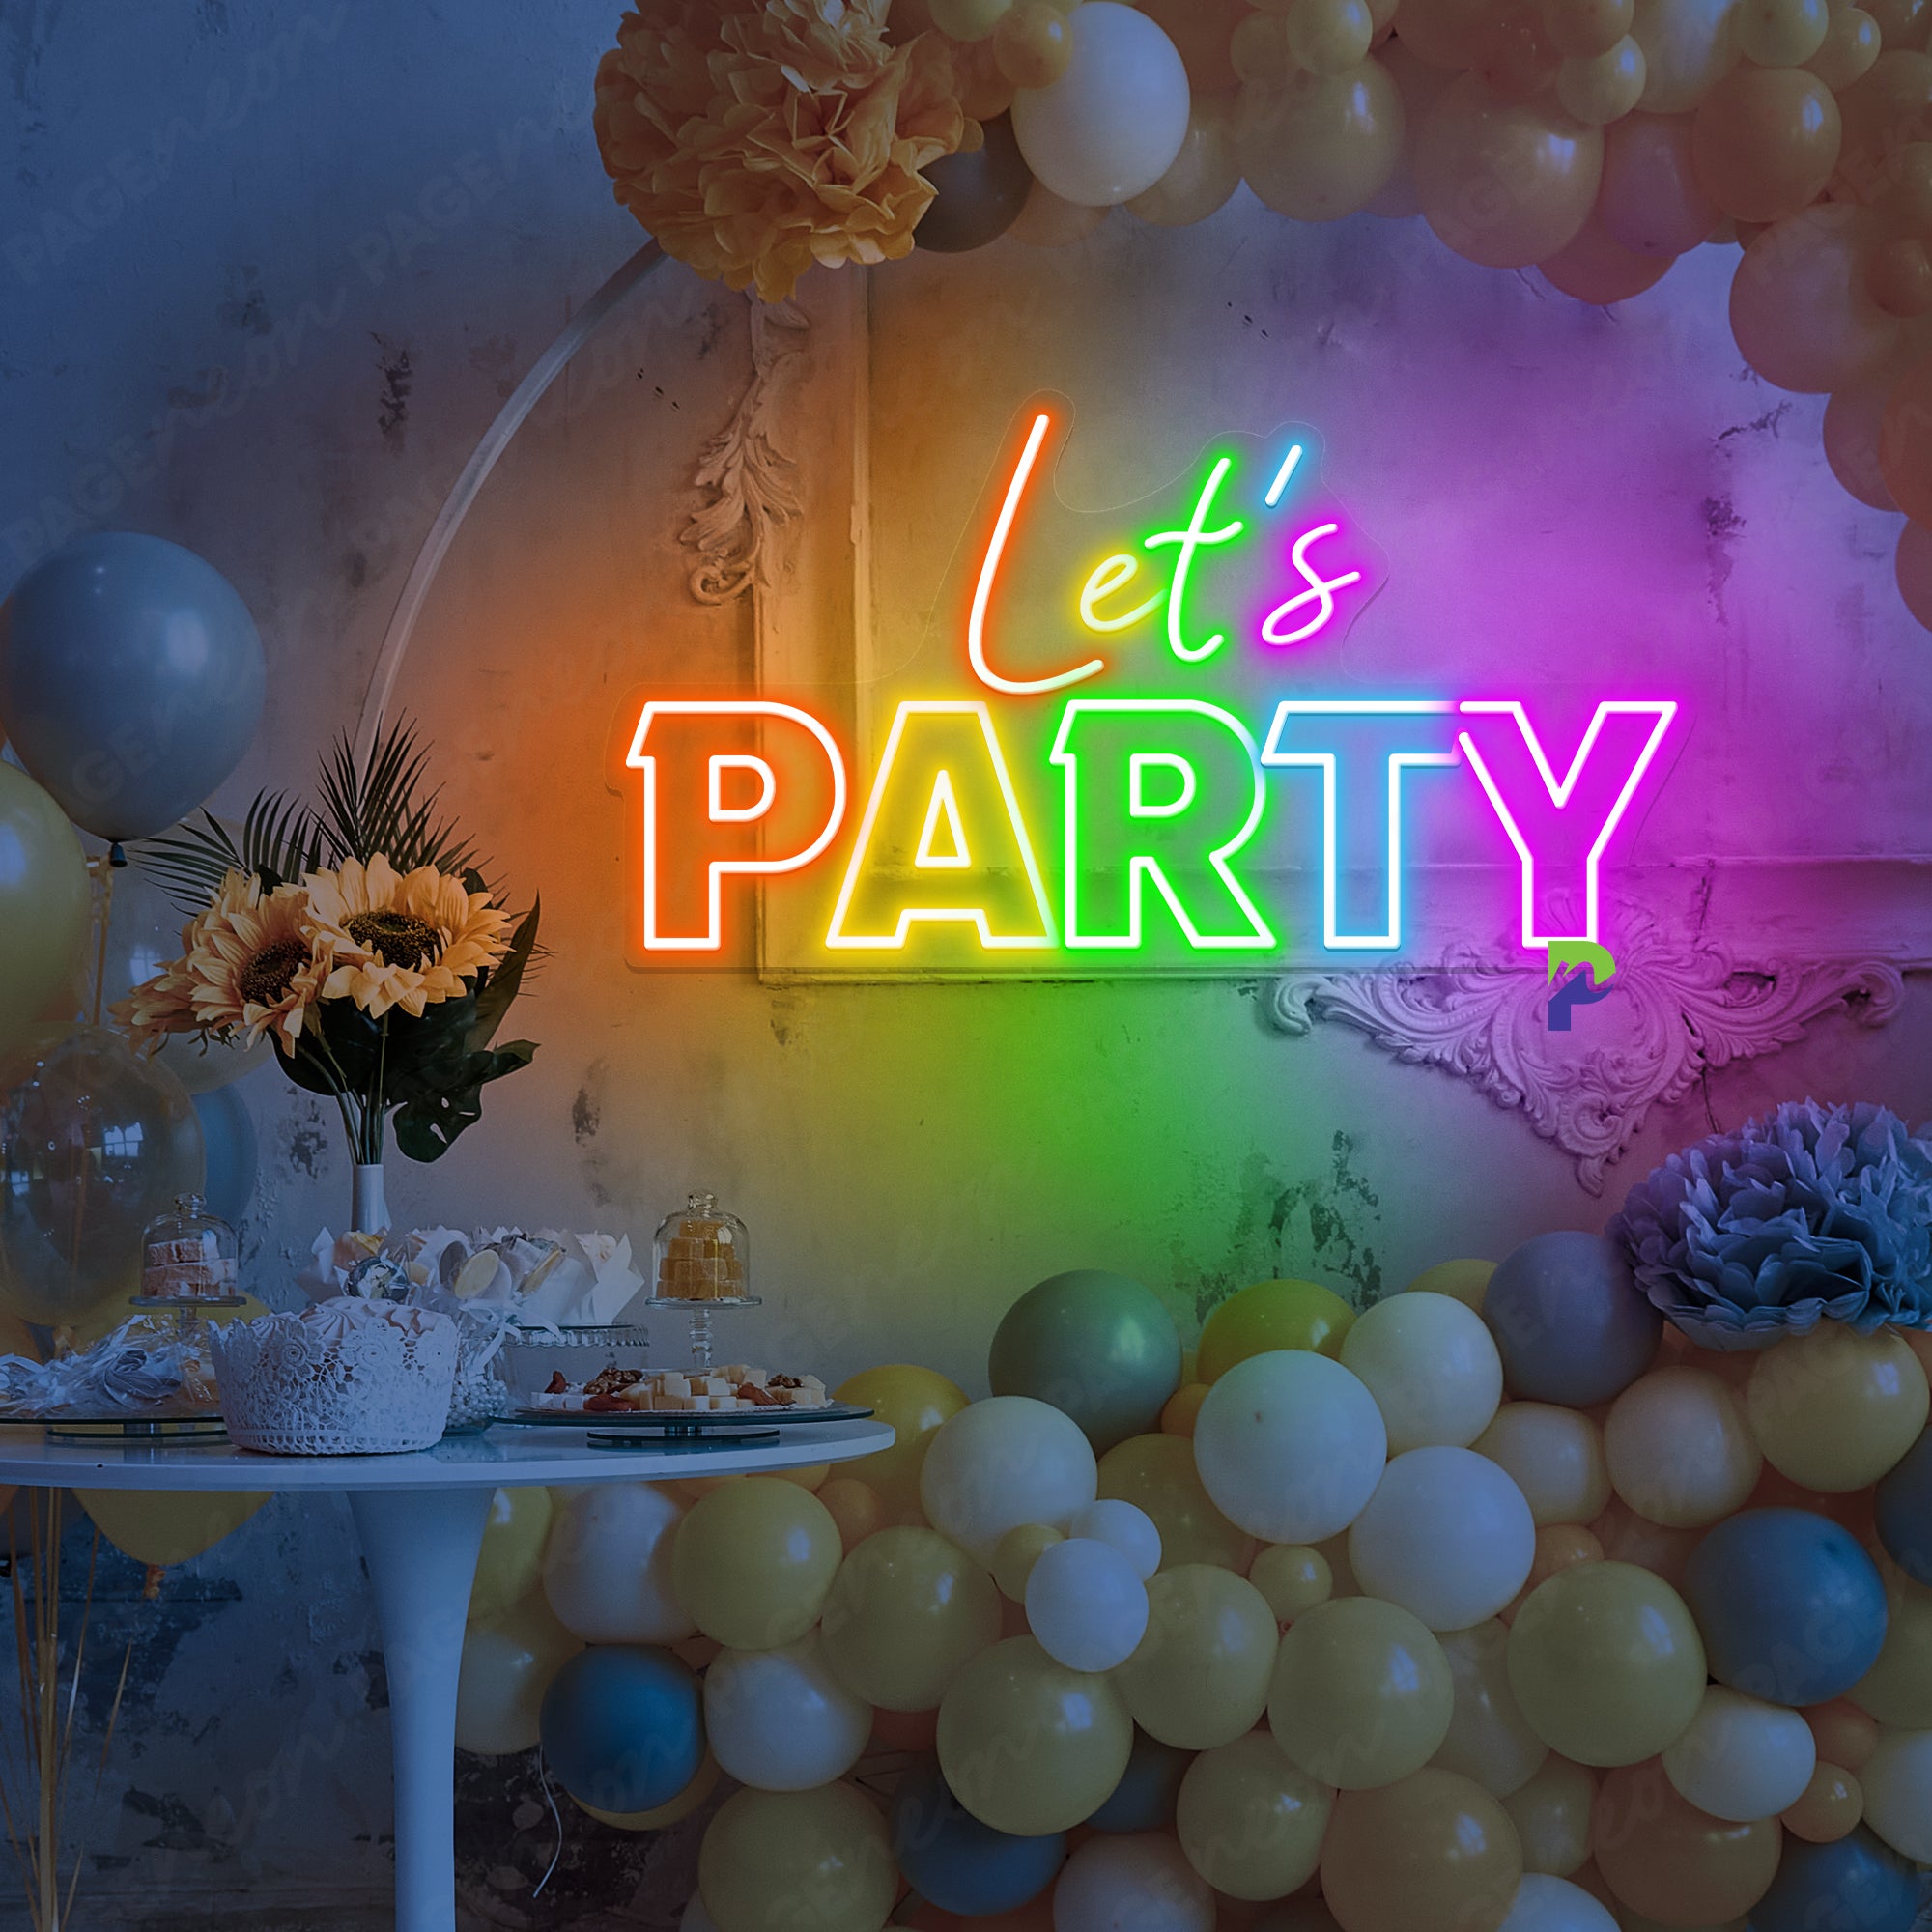 Let's Party Neon Sign Colorful Big Led Light